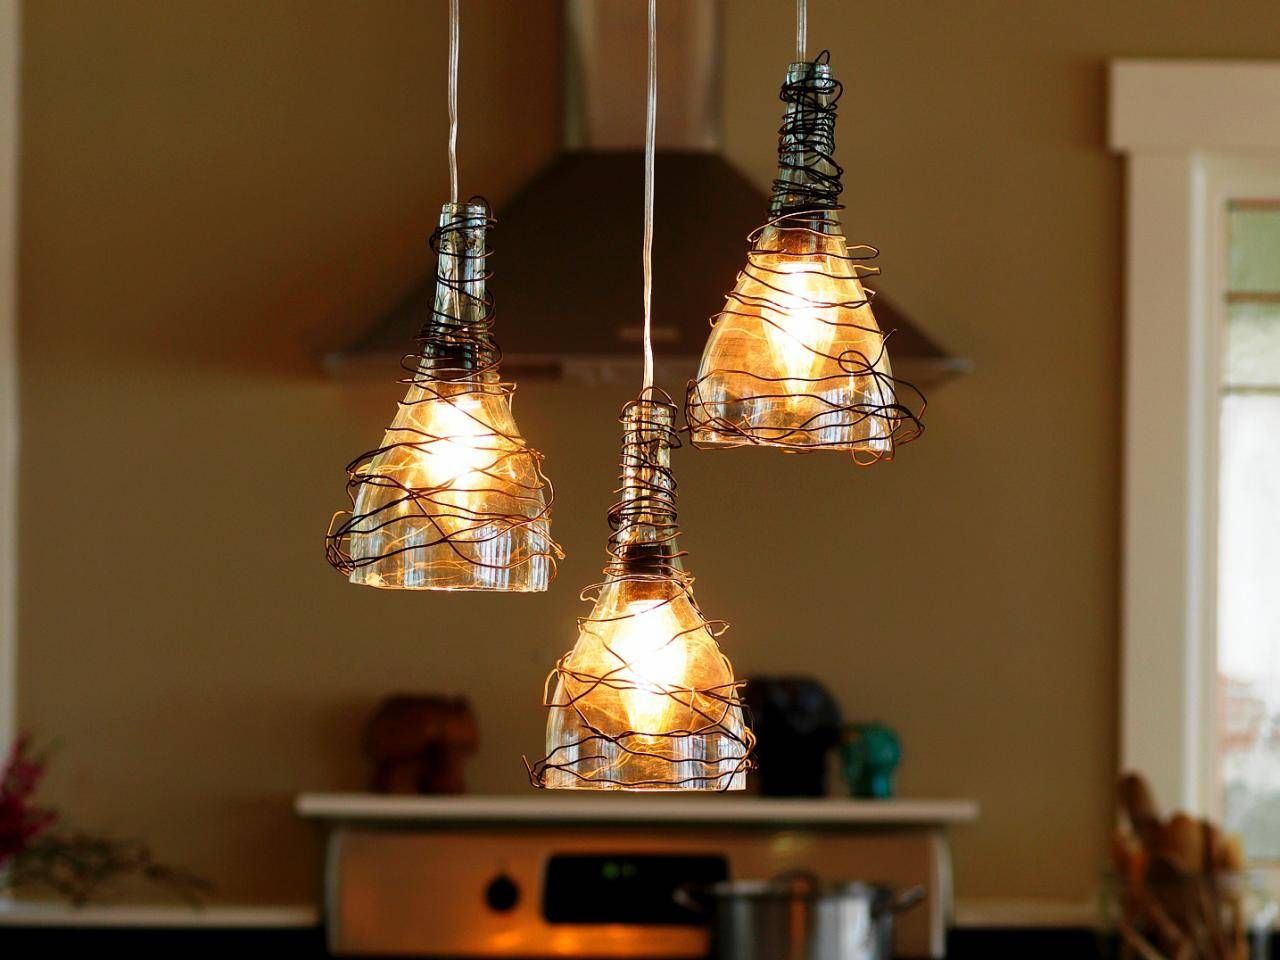 Upcycle Wine Bottle Into Pendant Light Fixtures | How Tos | Diy Intended For Wine Bottle Pendant Lights (View 2 of 15)